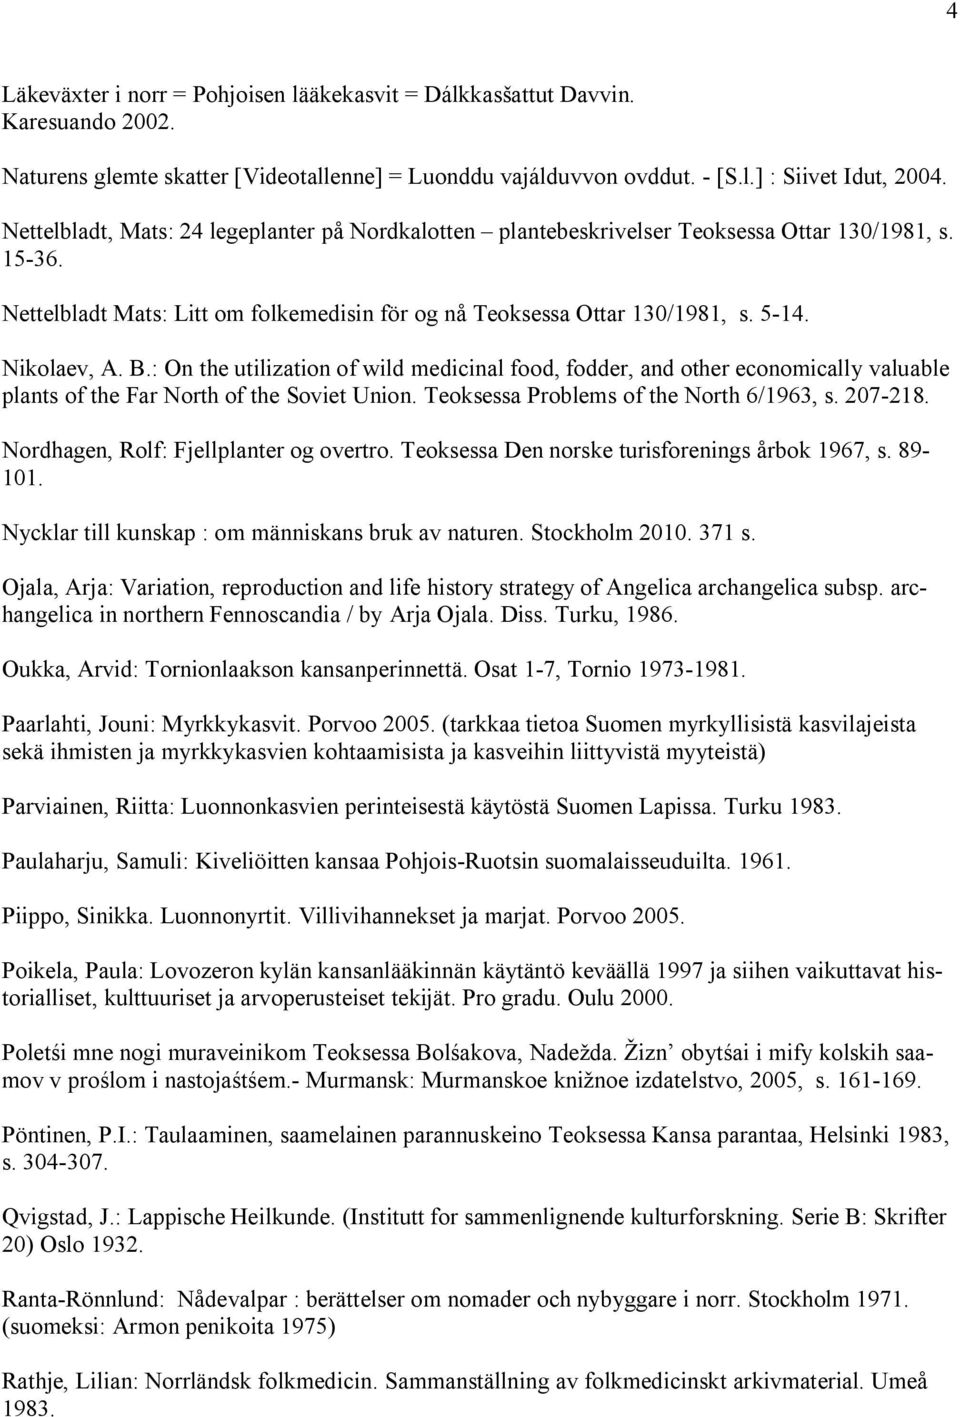 Nikolaev, A. B.: On the utilization of wild medicinal food, fodder, and other economically valuable plants of the Far North of the Soviet Union. Teoksessa Problems of the North 6/1963, s. 207 218.